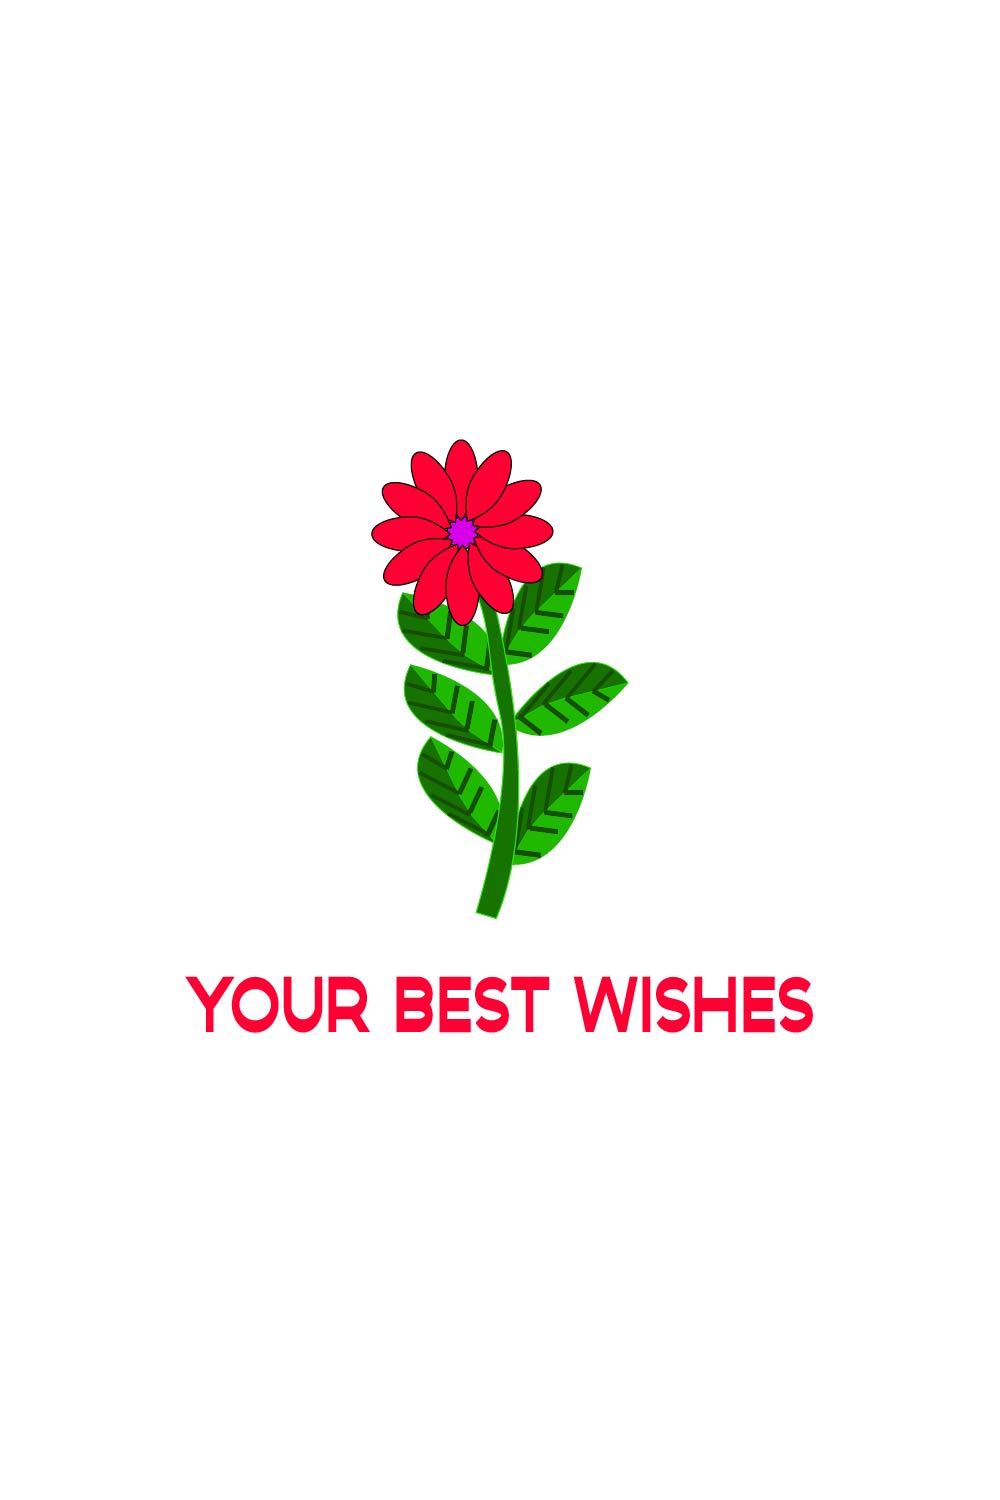 YOUR BEST WISHES pinterest preview image.